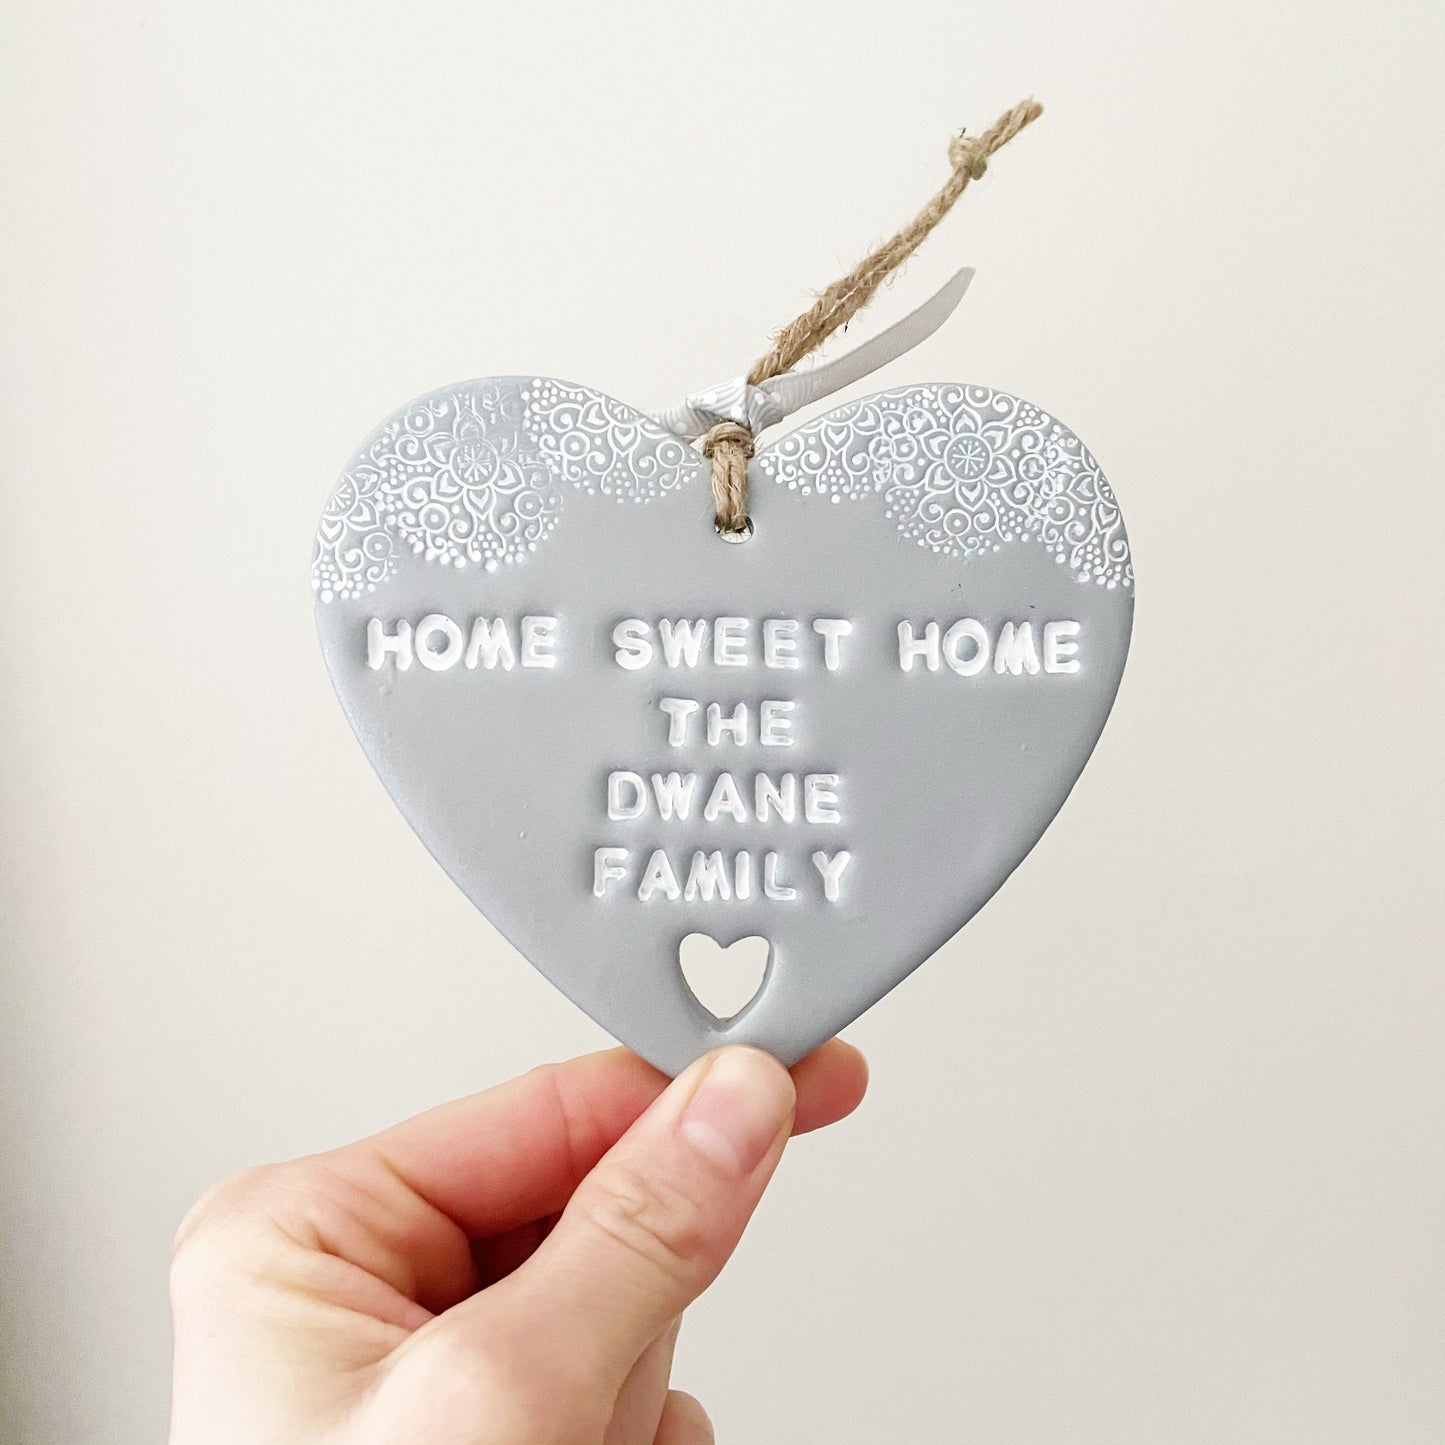 Personalised housewarming new home gift, silver clay heart with a white lace edge at the top of the heart and a heart cut out at the bottom with jute twine for hanging, the heart is personalised with HOME SWEET HOME THE DWANE FAMILY